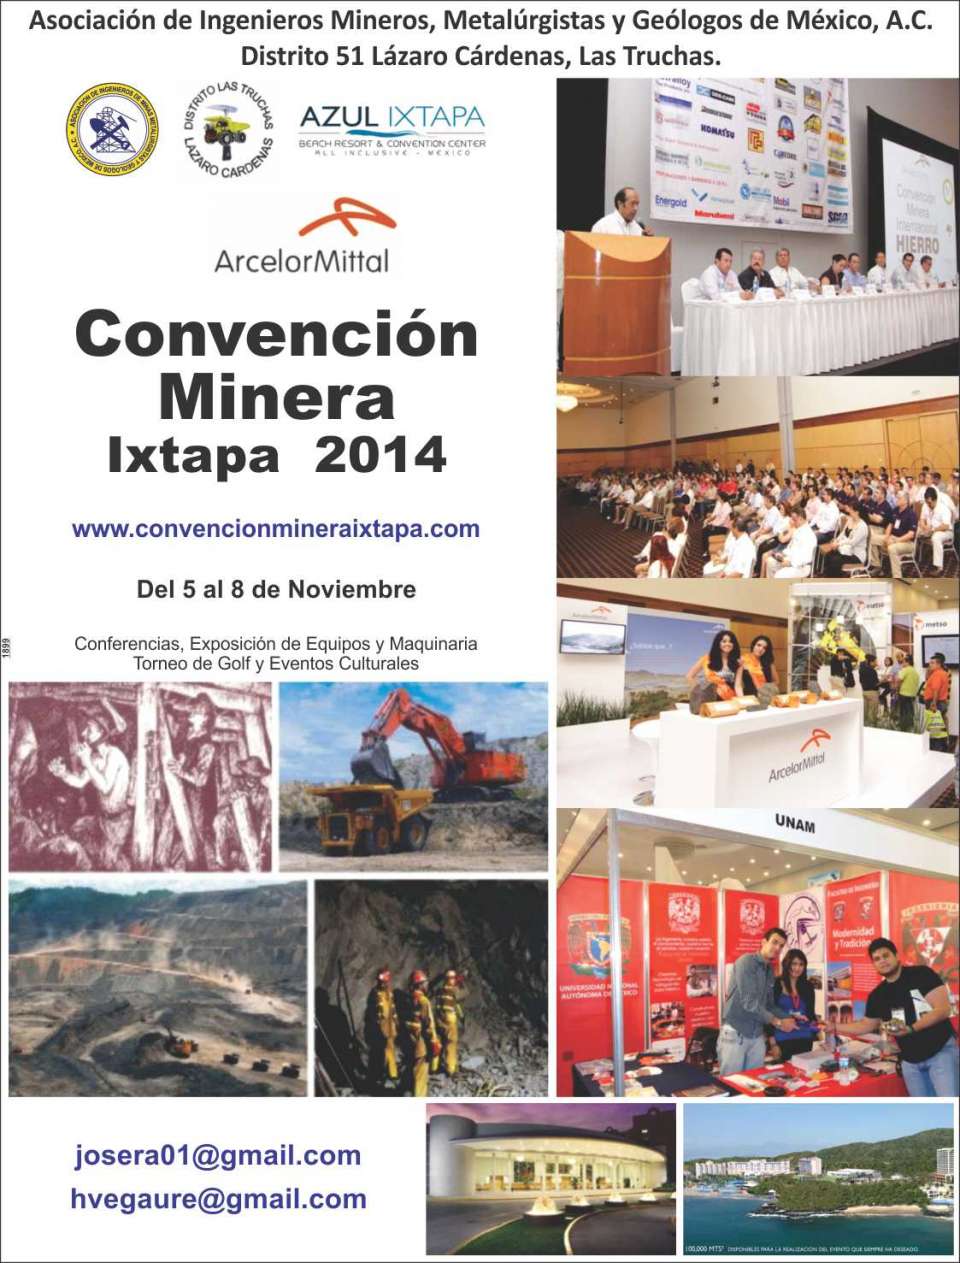 CONFERENCES AND EXHIBITION OF MACHINERY AND MINING PRODUCTS